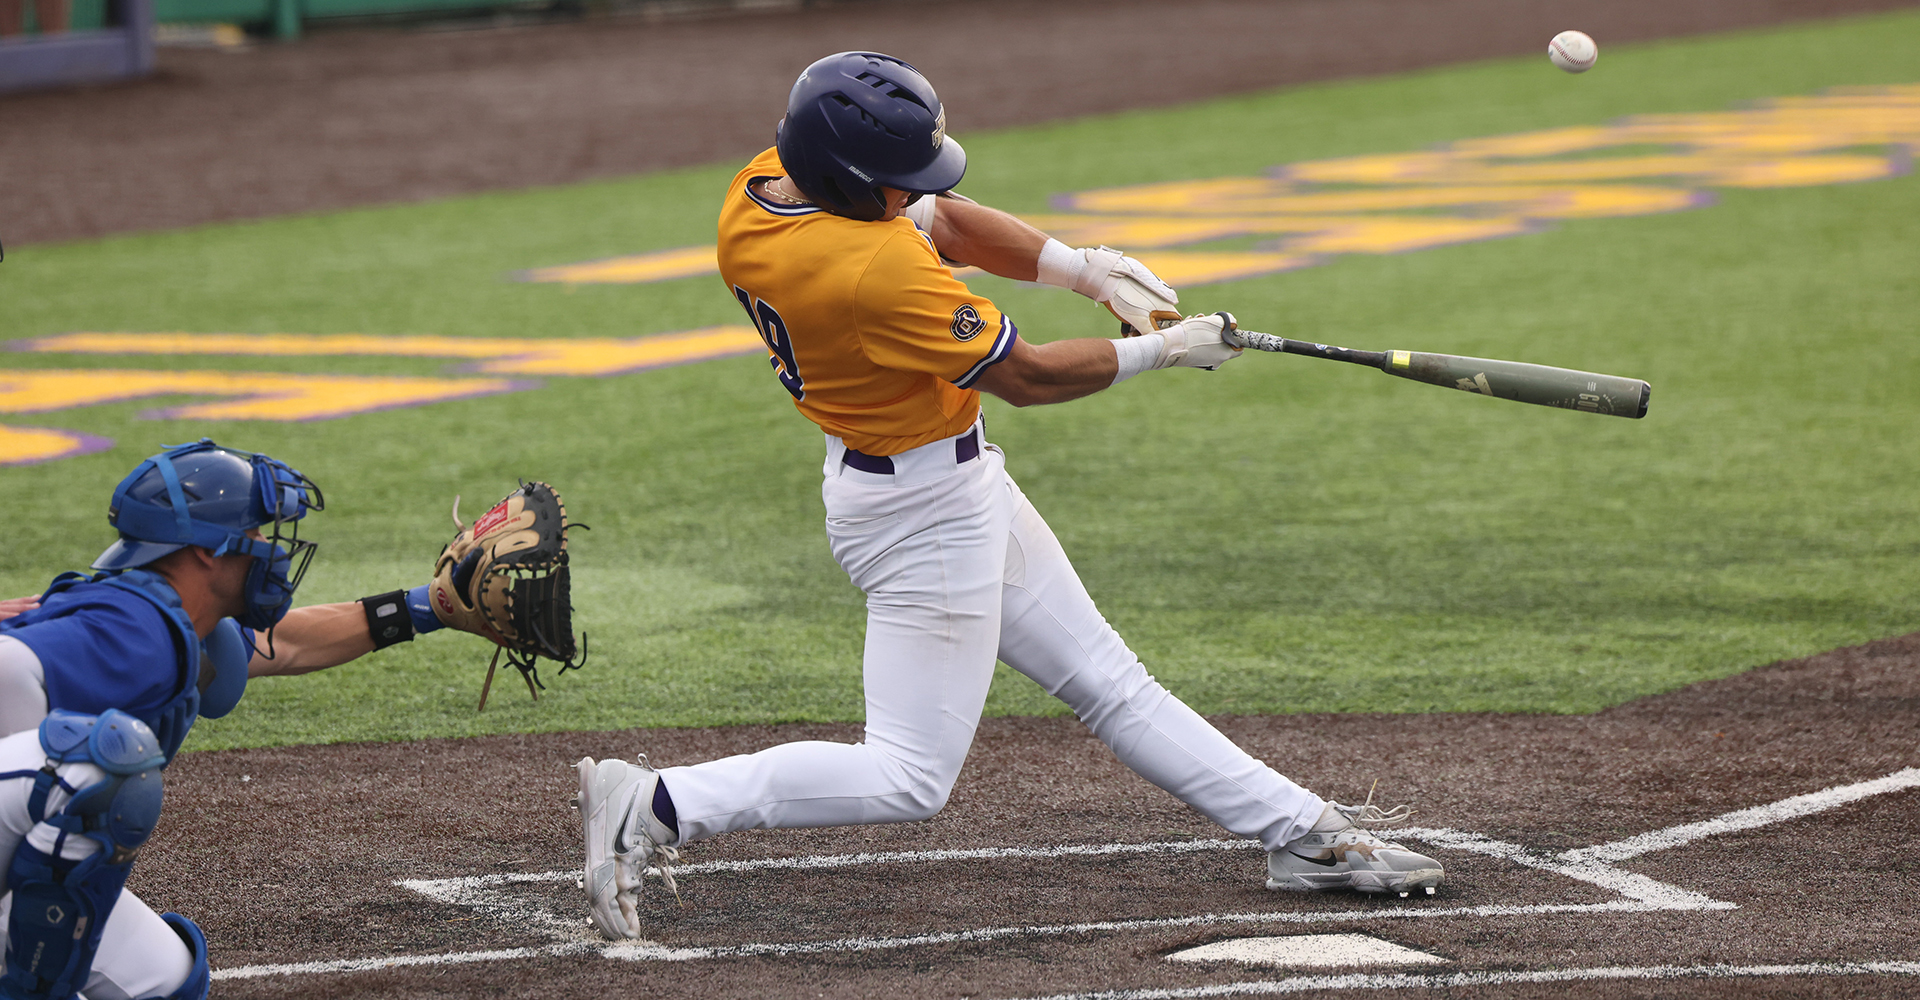 Cougars even series with game two win over Golden Eagles